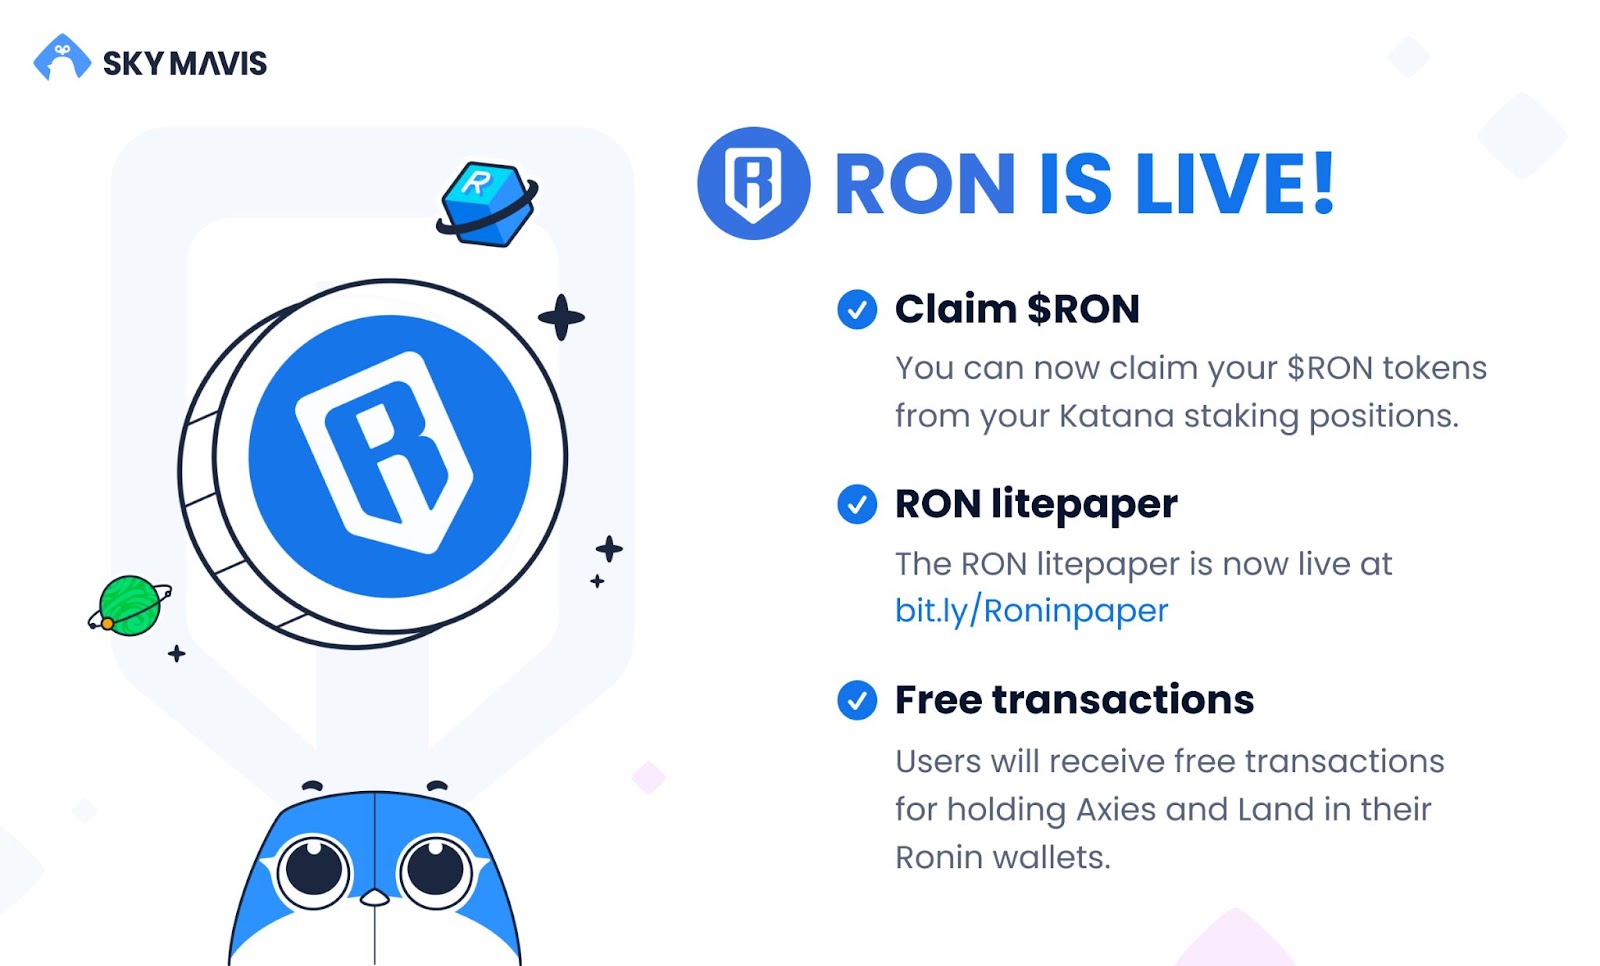 RON is Live — Here is the Future of the Ronin Blockchain